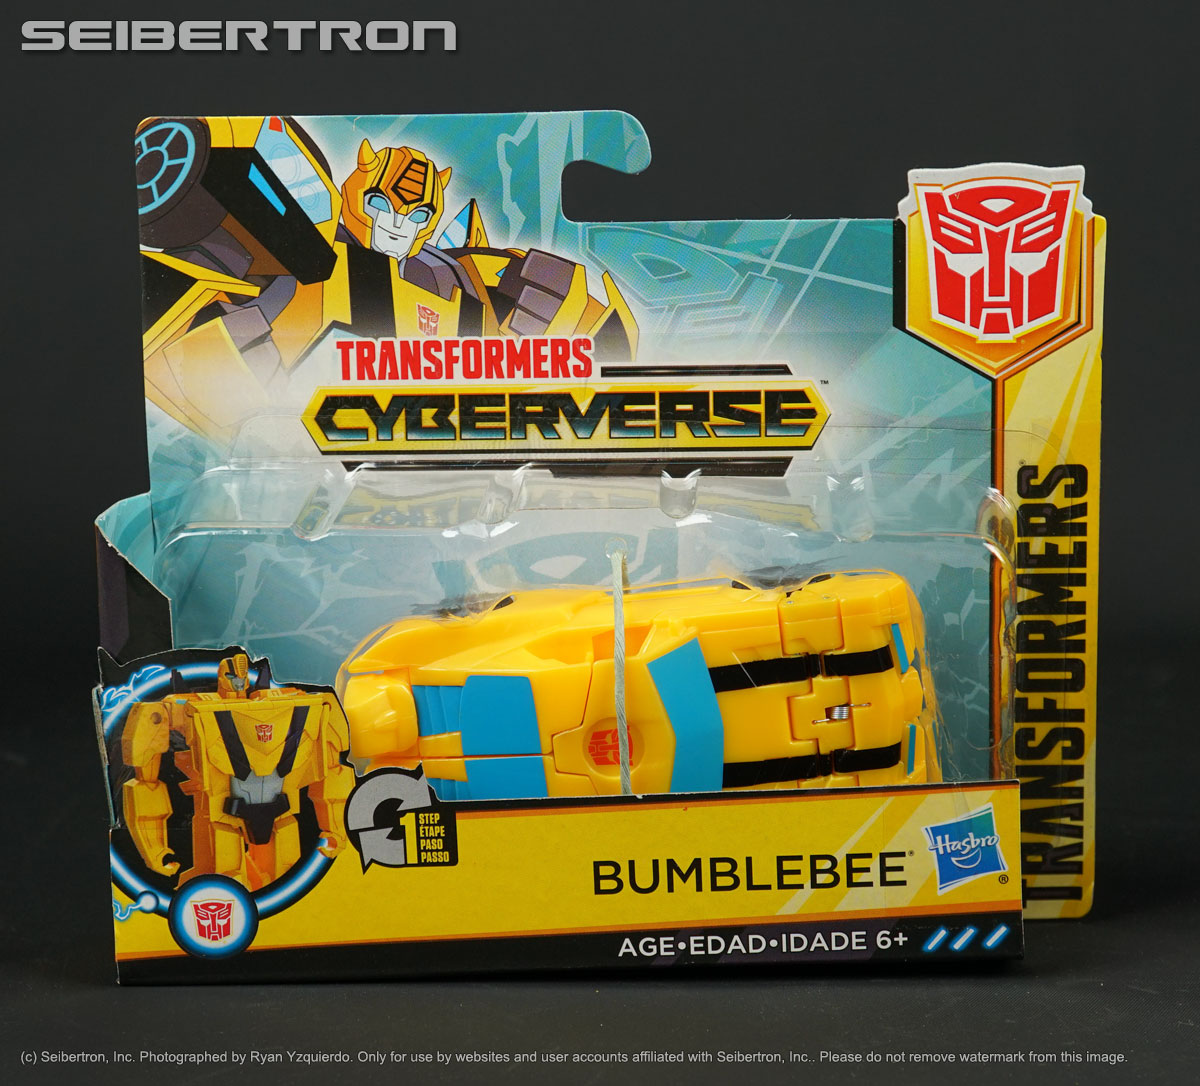 1 Step Changer BUMBLEBEE Transformers Cyberverse Hasbro 2018 NEW Ages 6+